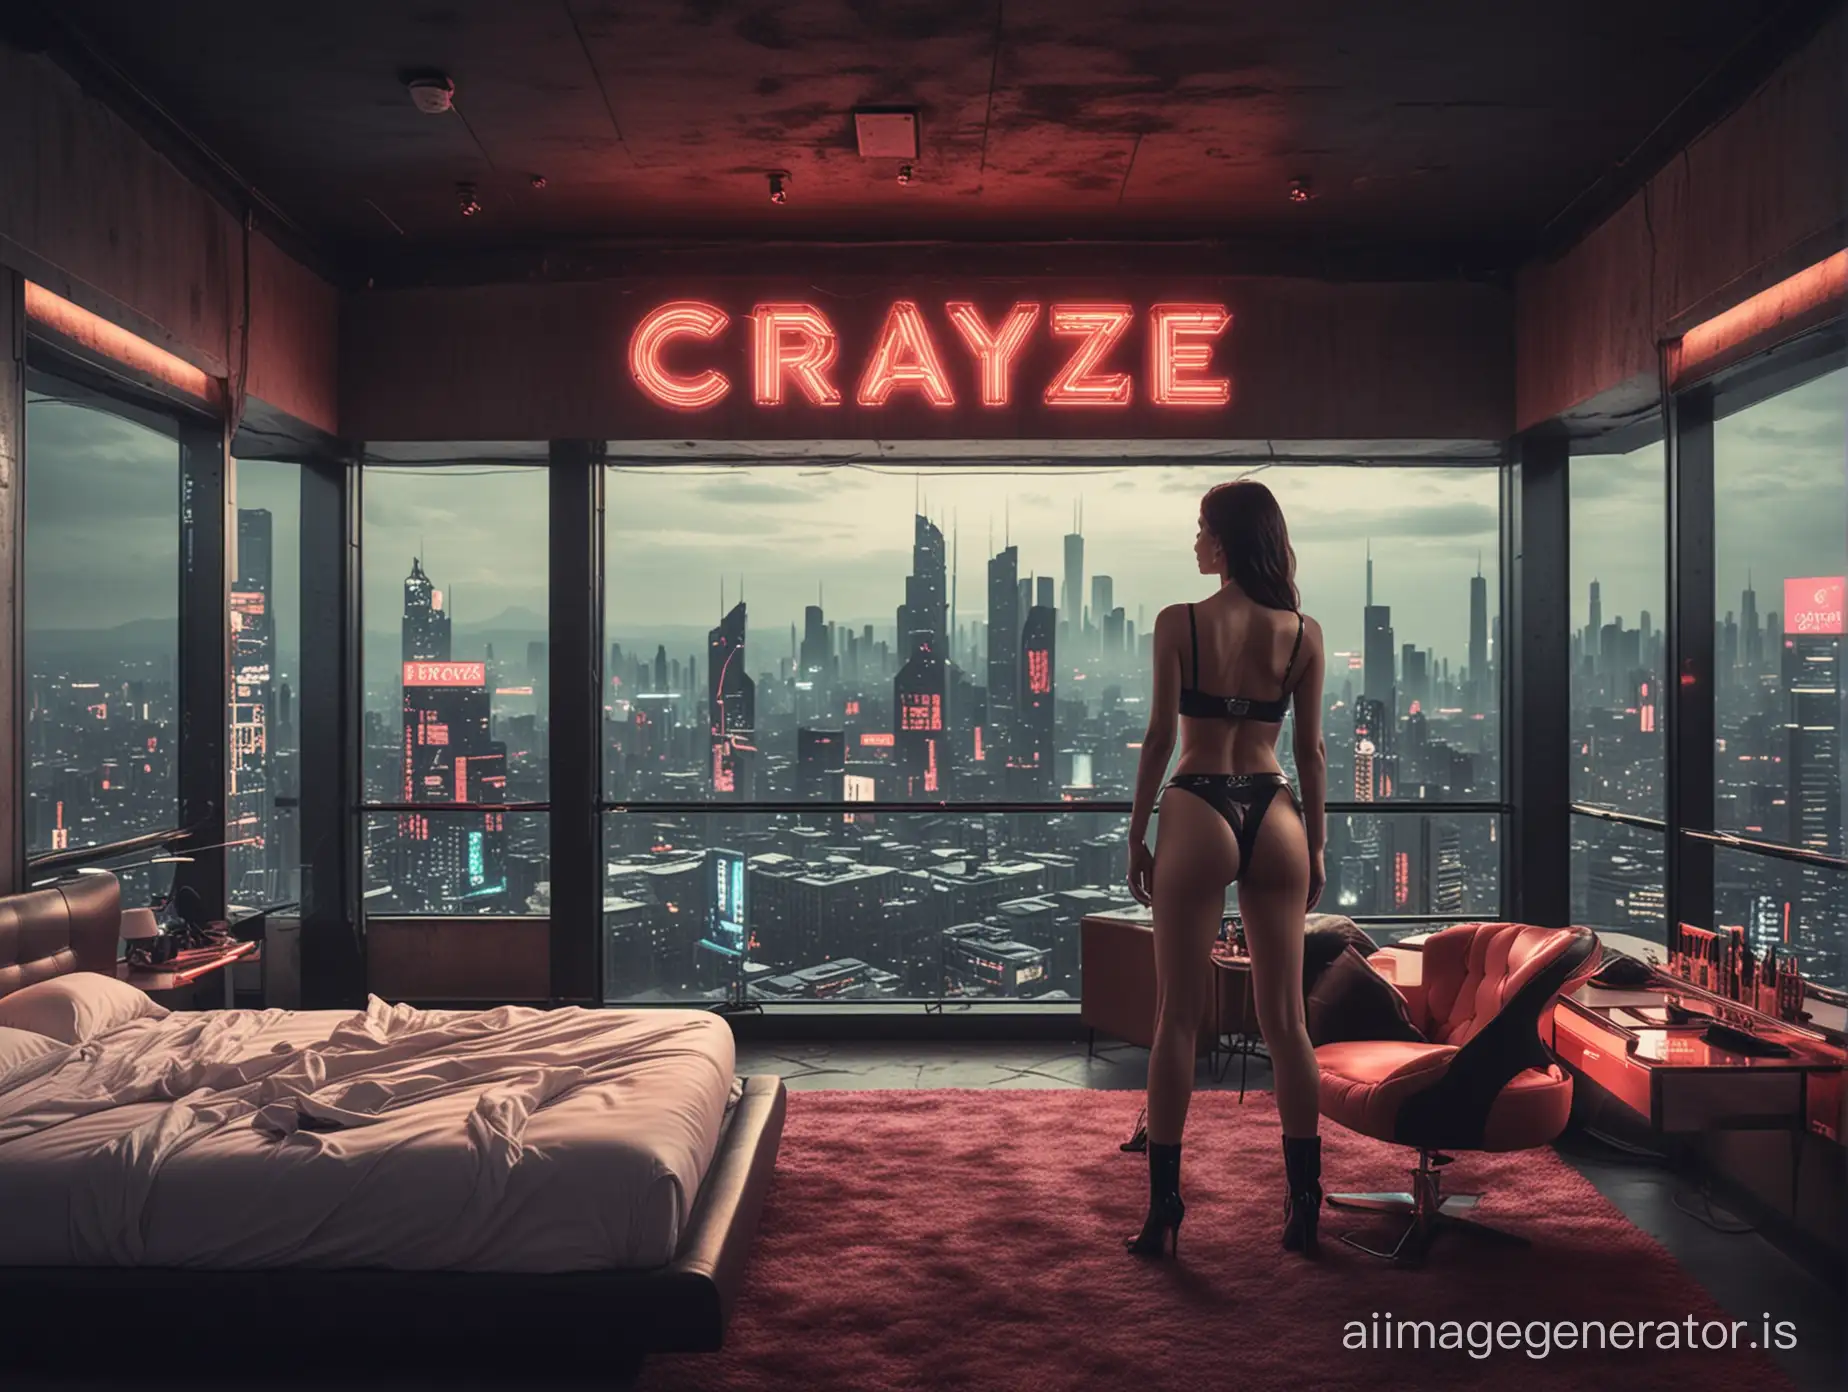 Futuristic-Hotel-Room-with-Dystopian-City-View-and-Neon-CRAZZE-Sign